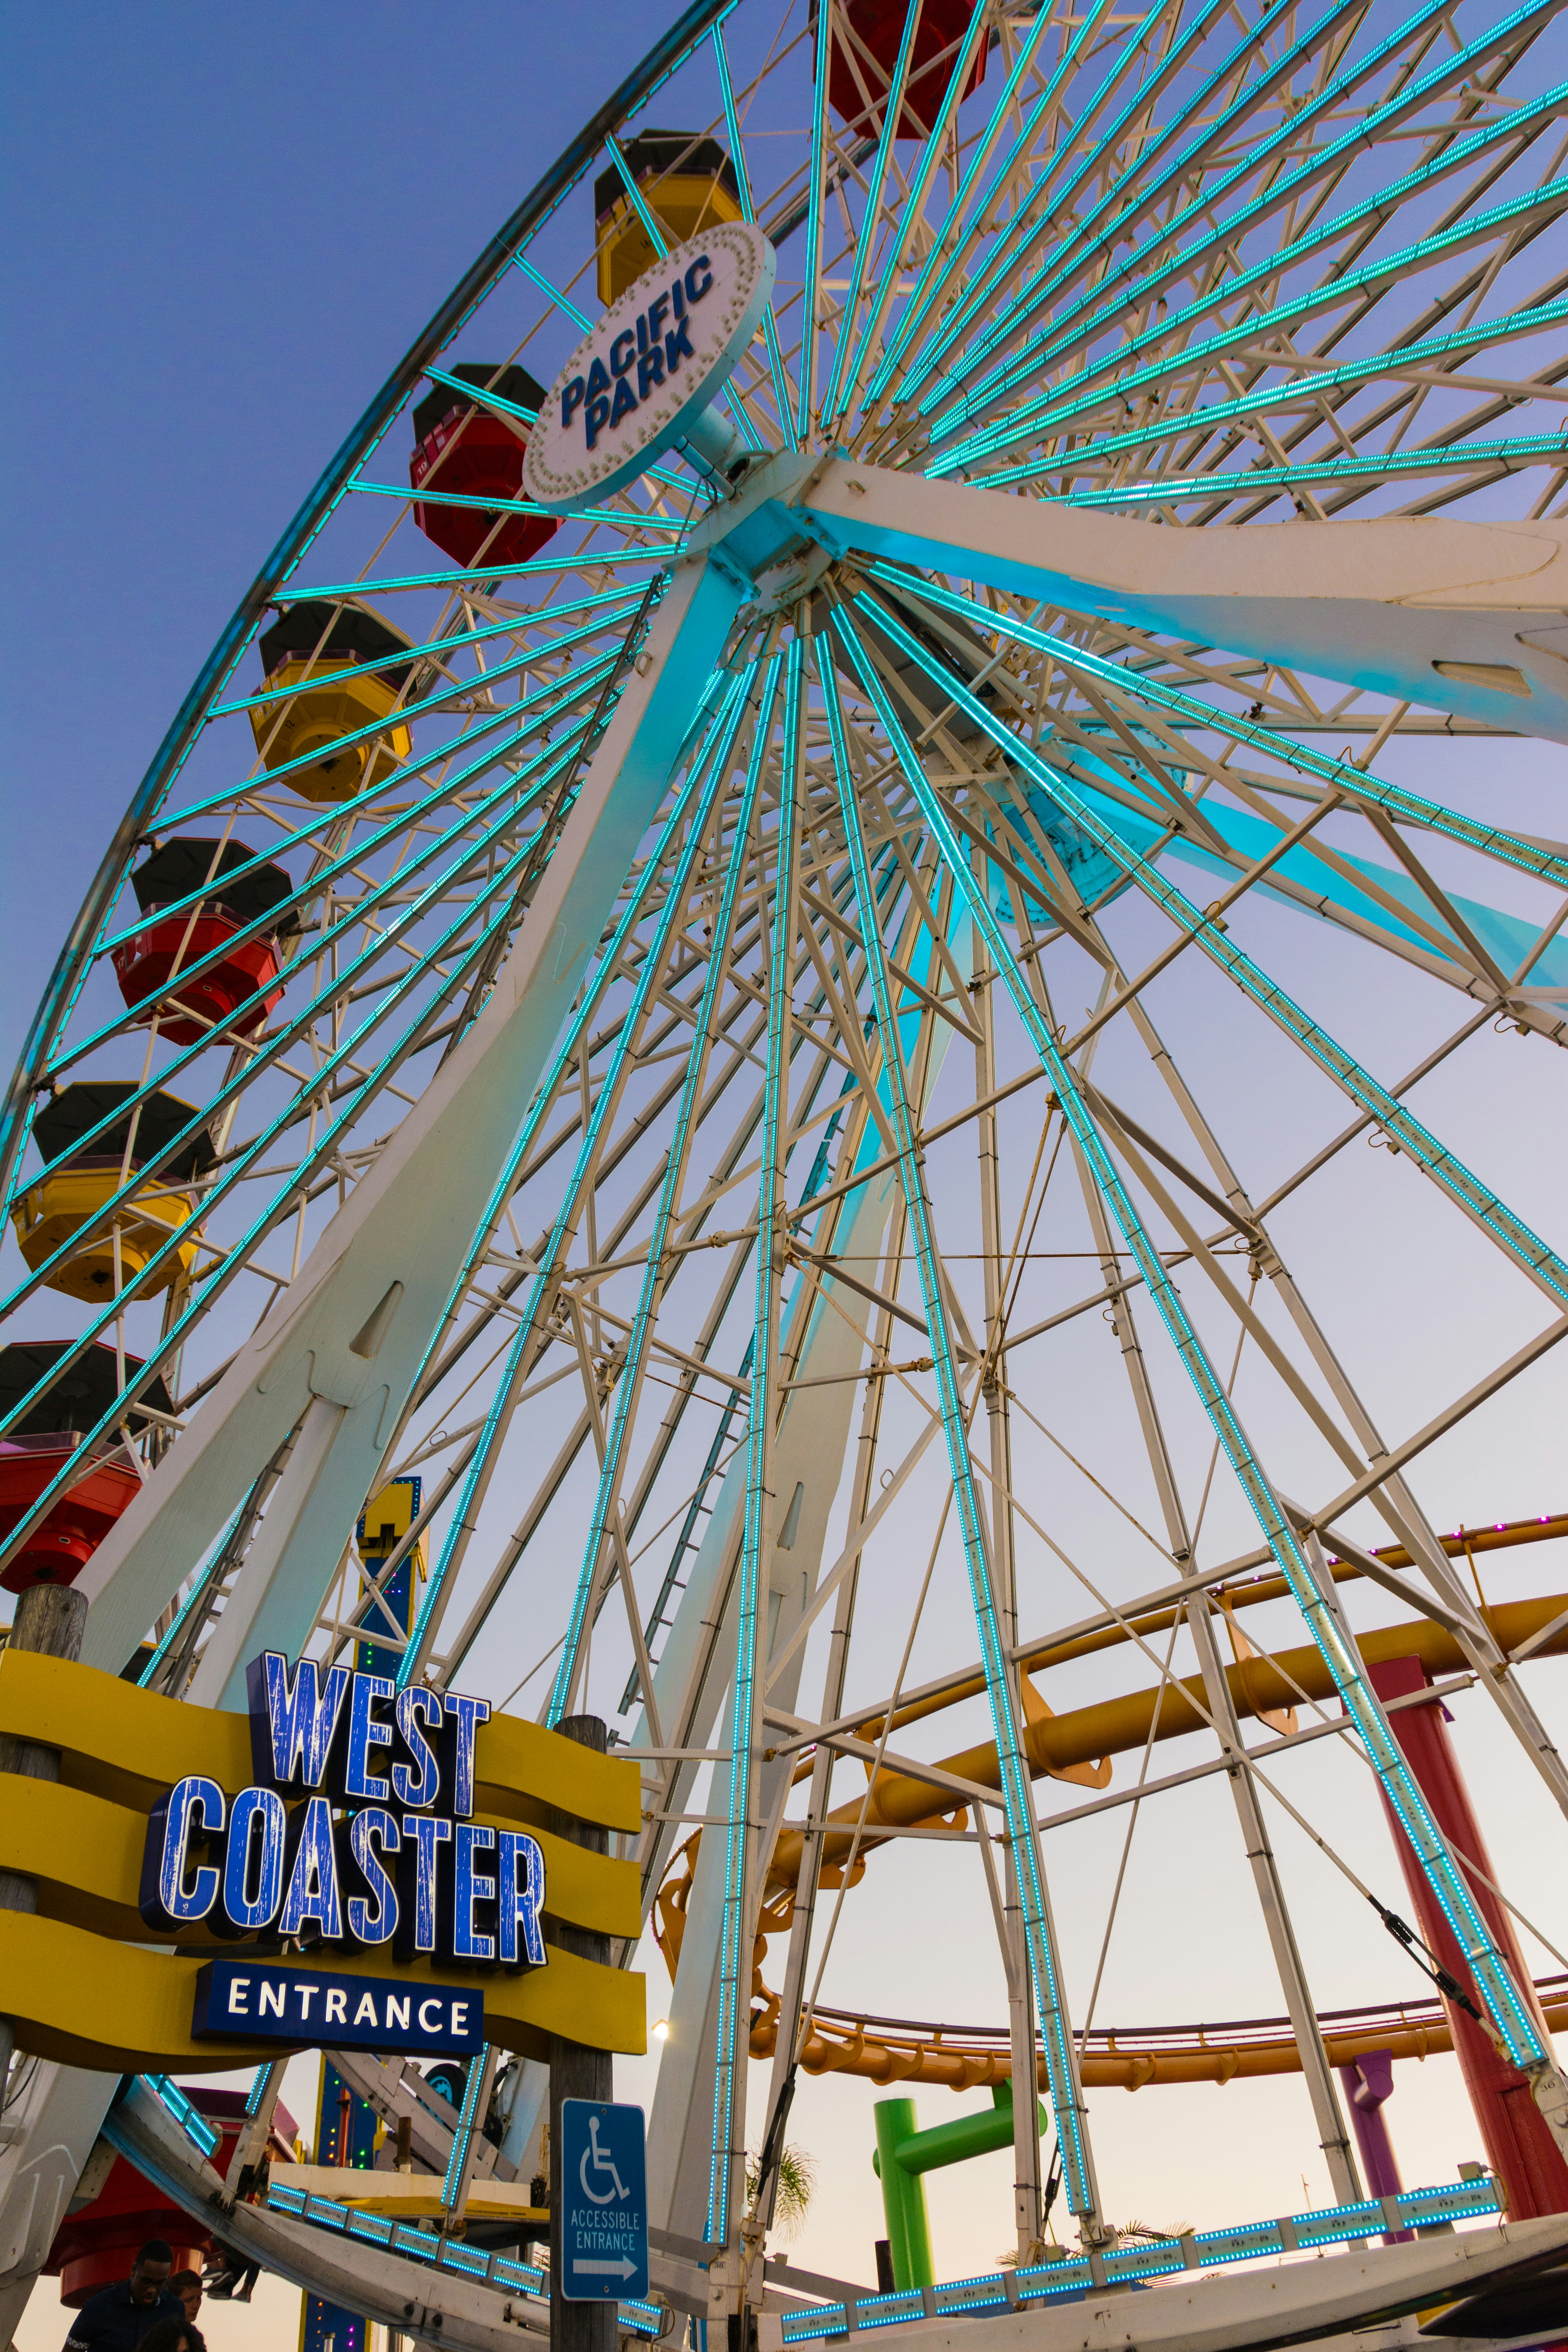 A close-up view looking up at the ferris wheel on Santa Monica Pier. An illuminated sign says 'West Coaster Entrance'.